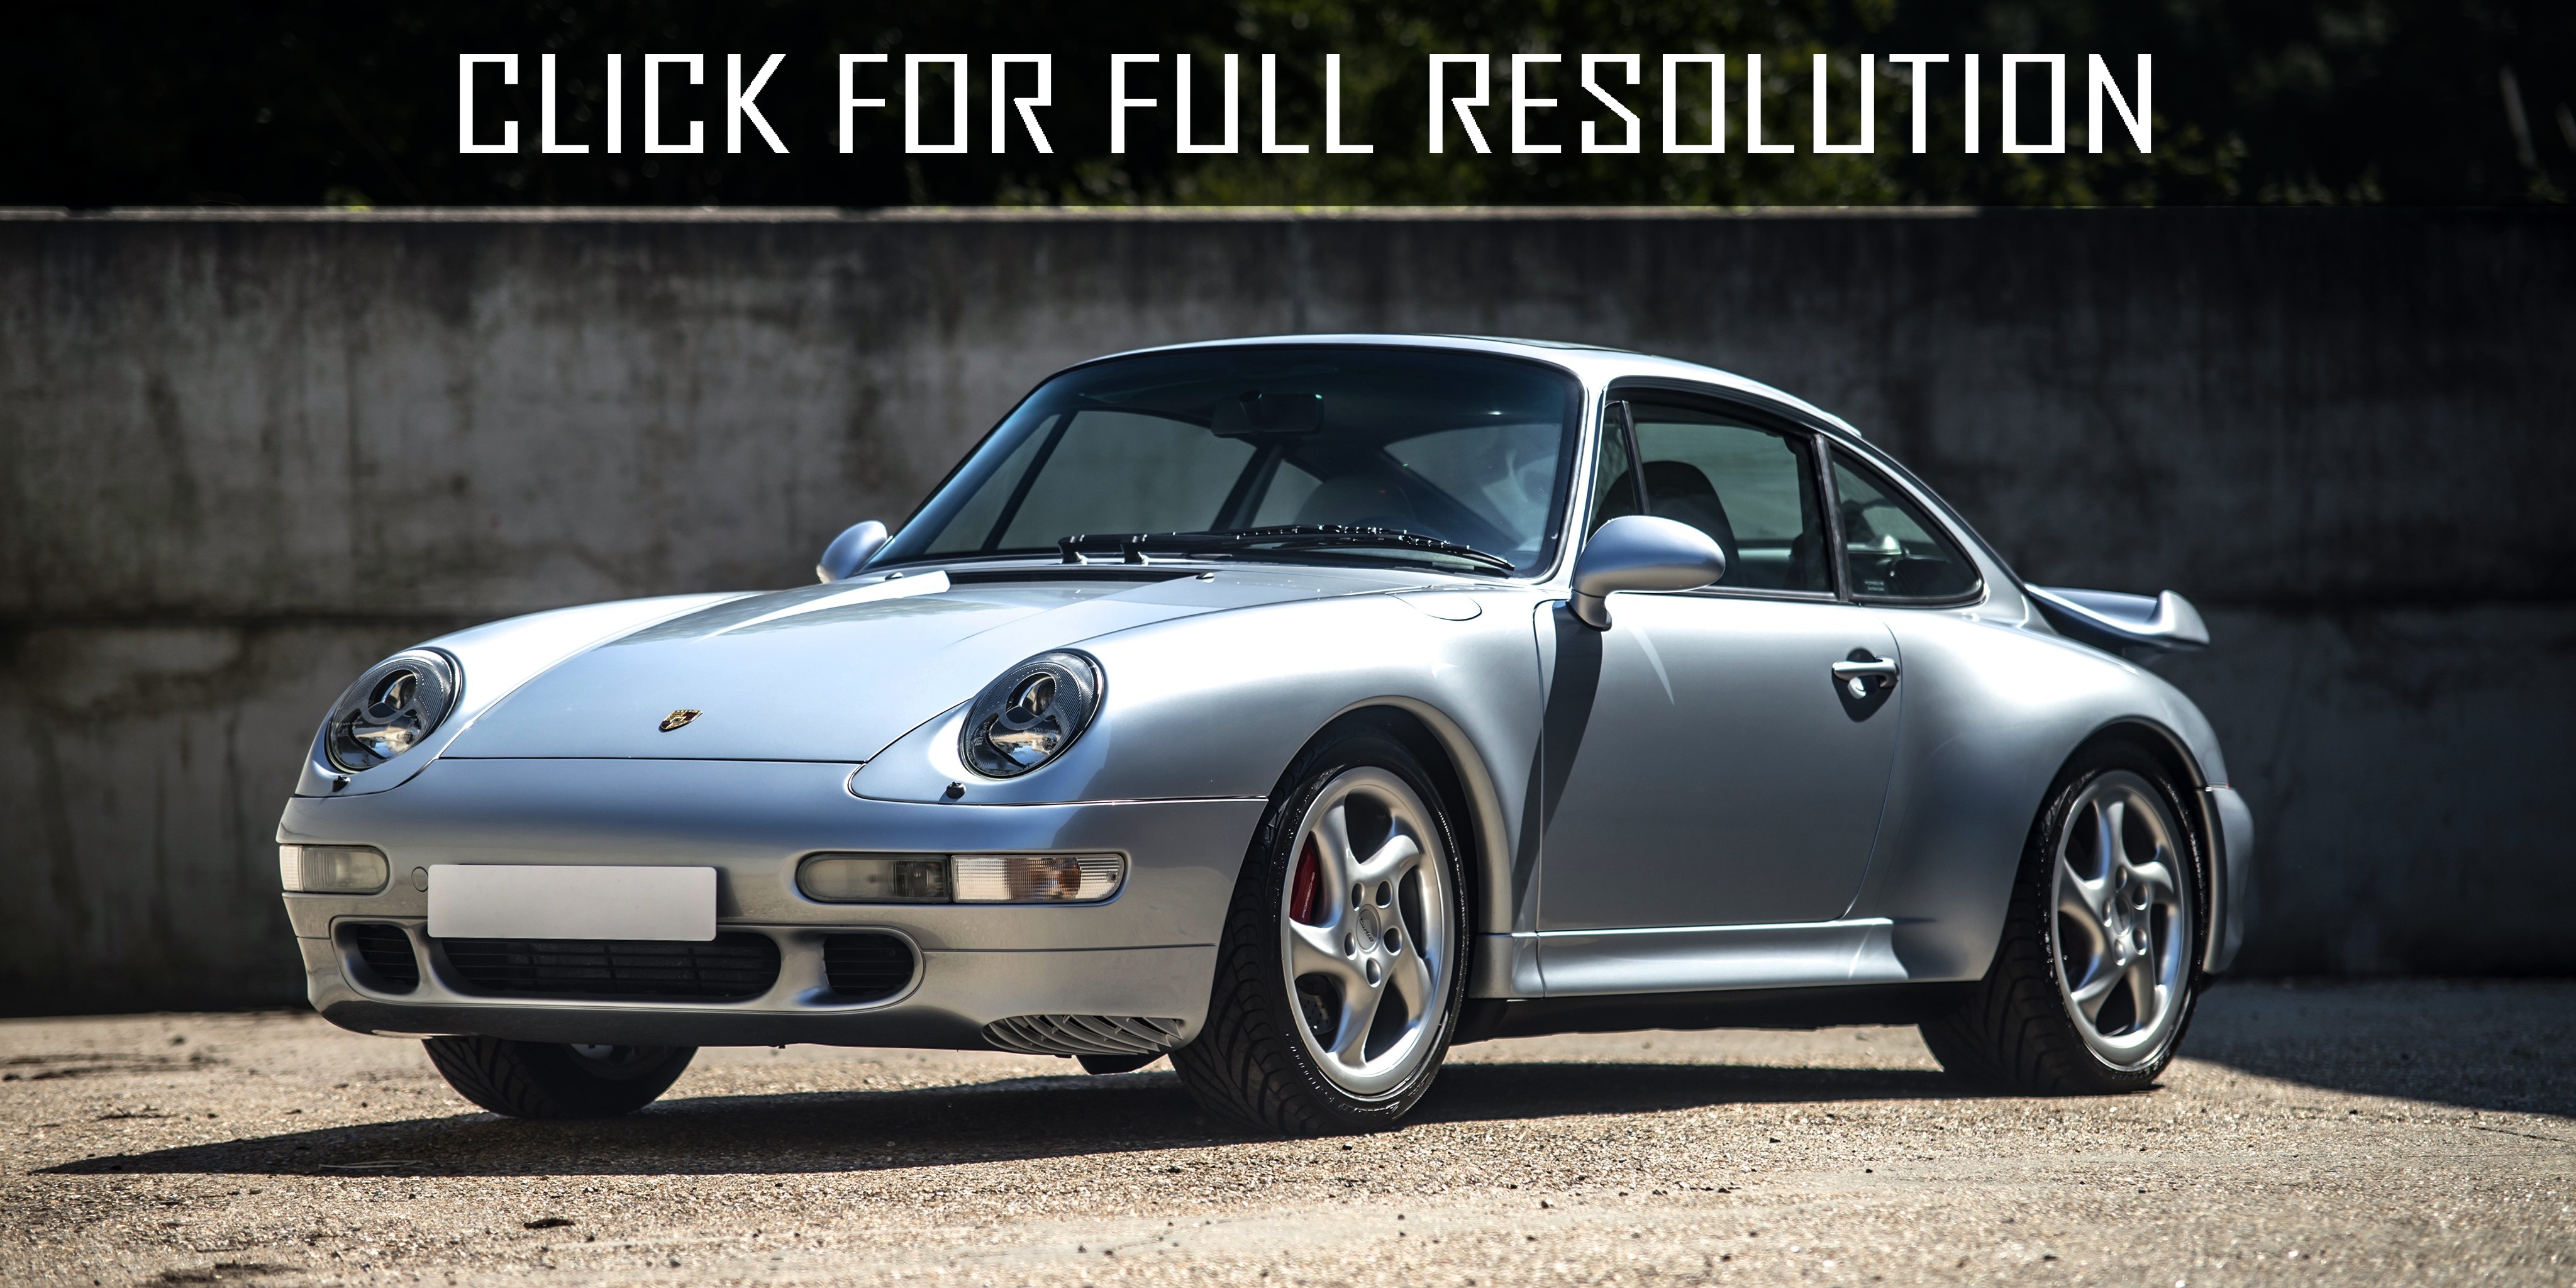 1995 Porsche 911 Turbo news, reviews, msrp, ratings with